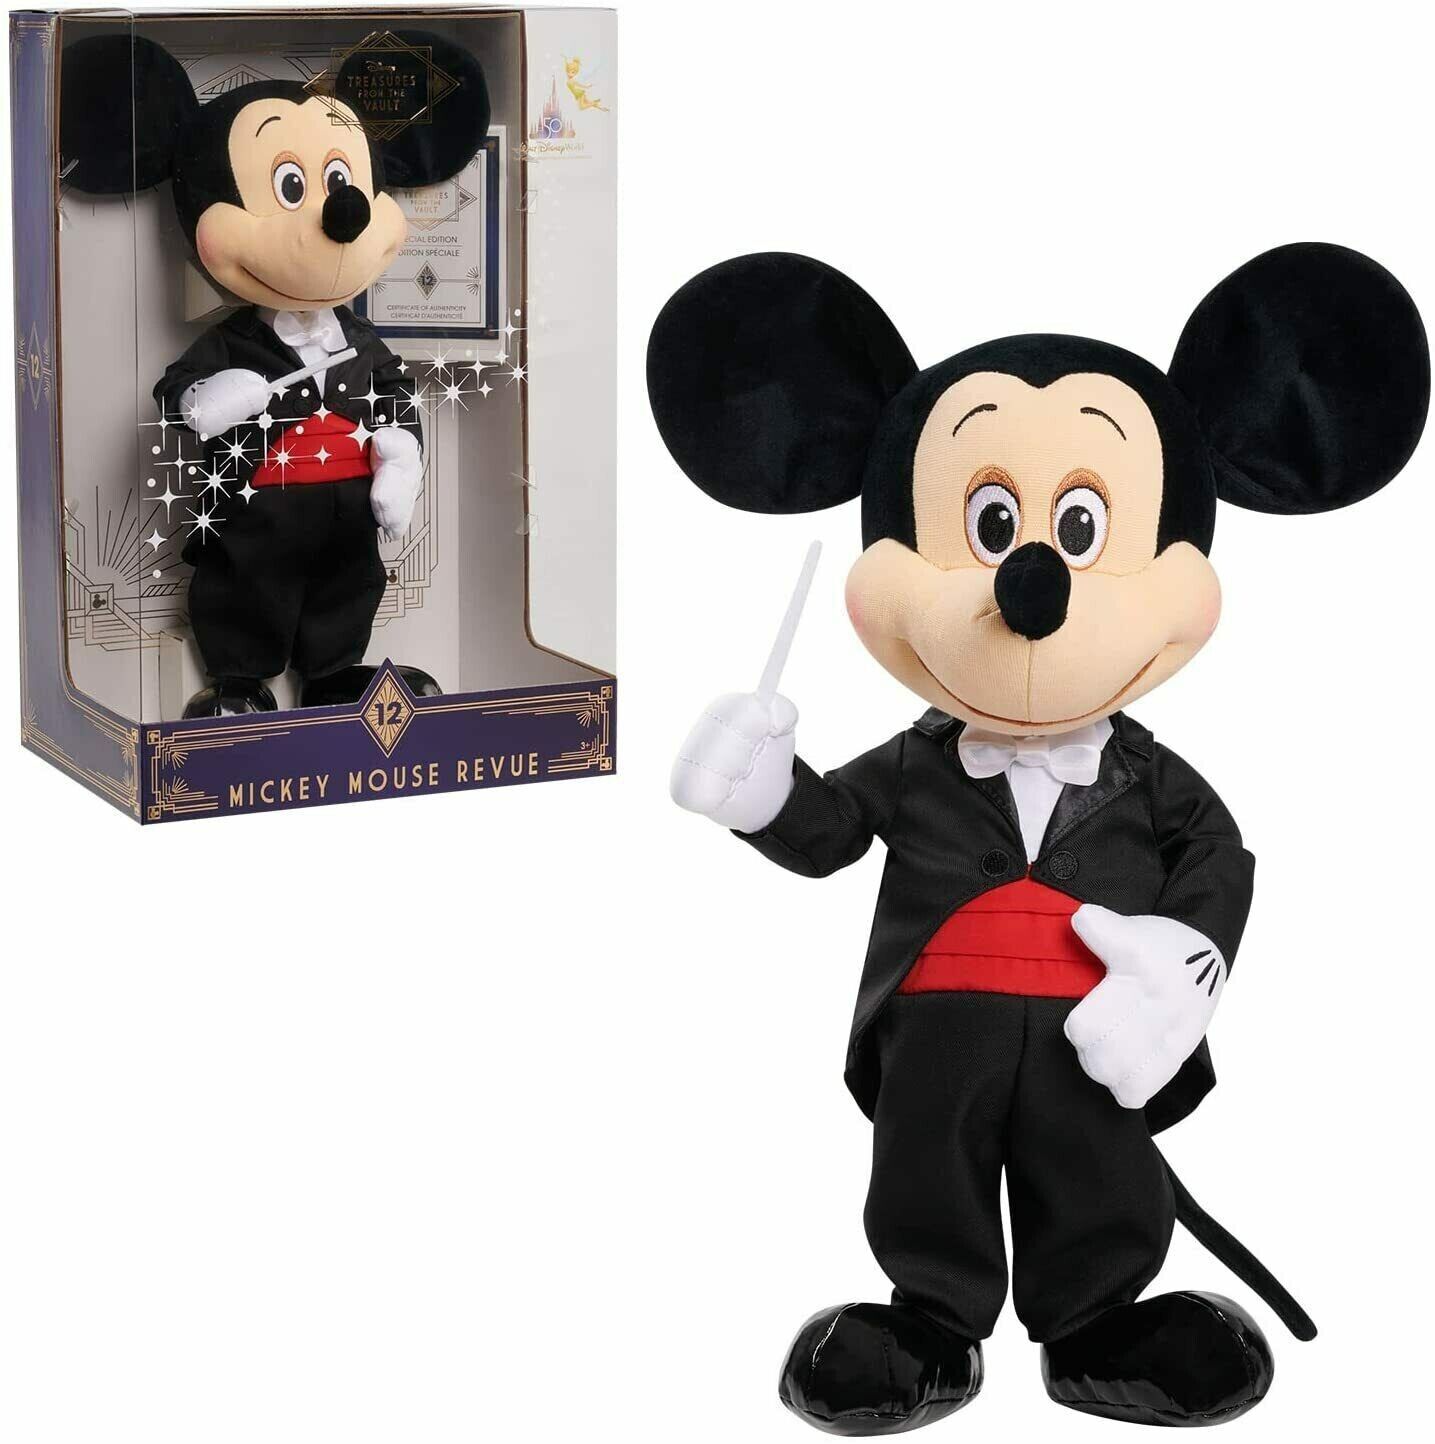 Disney Treasures From the Vault Mickey Mouse Revue Plush Limited Edition In Hand